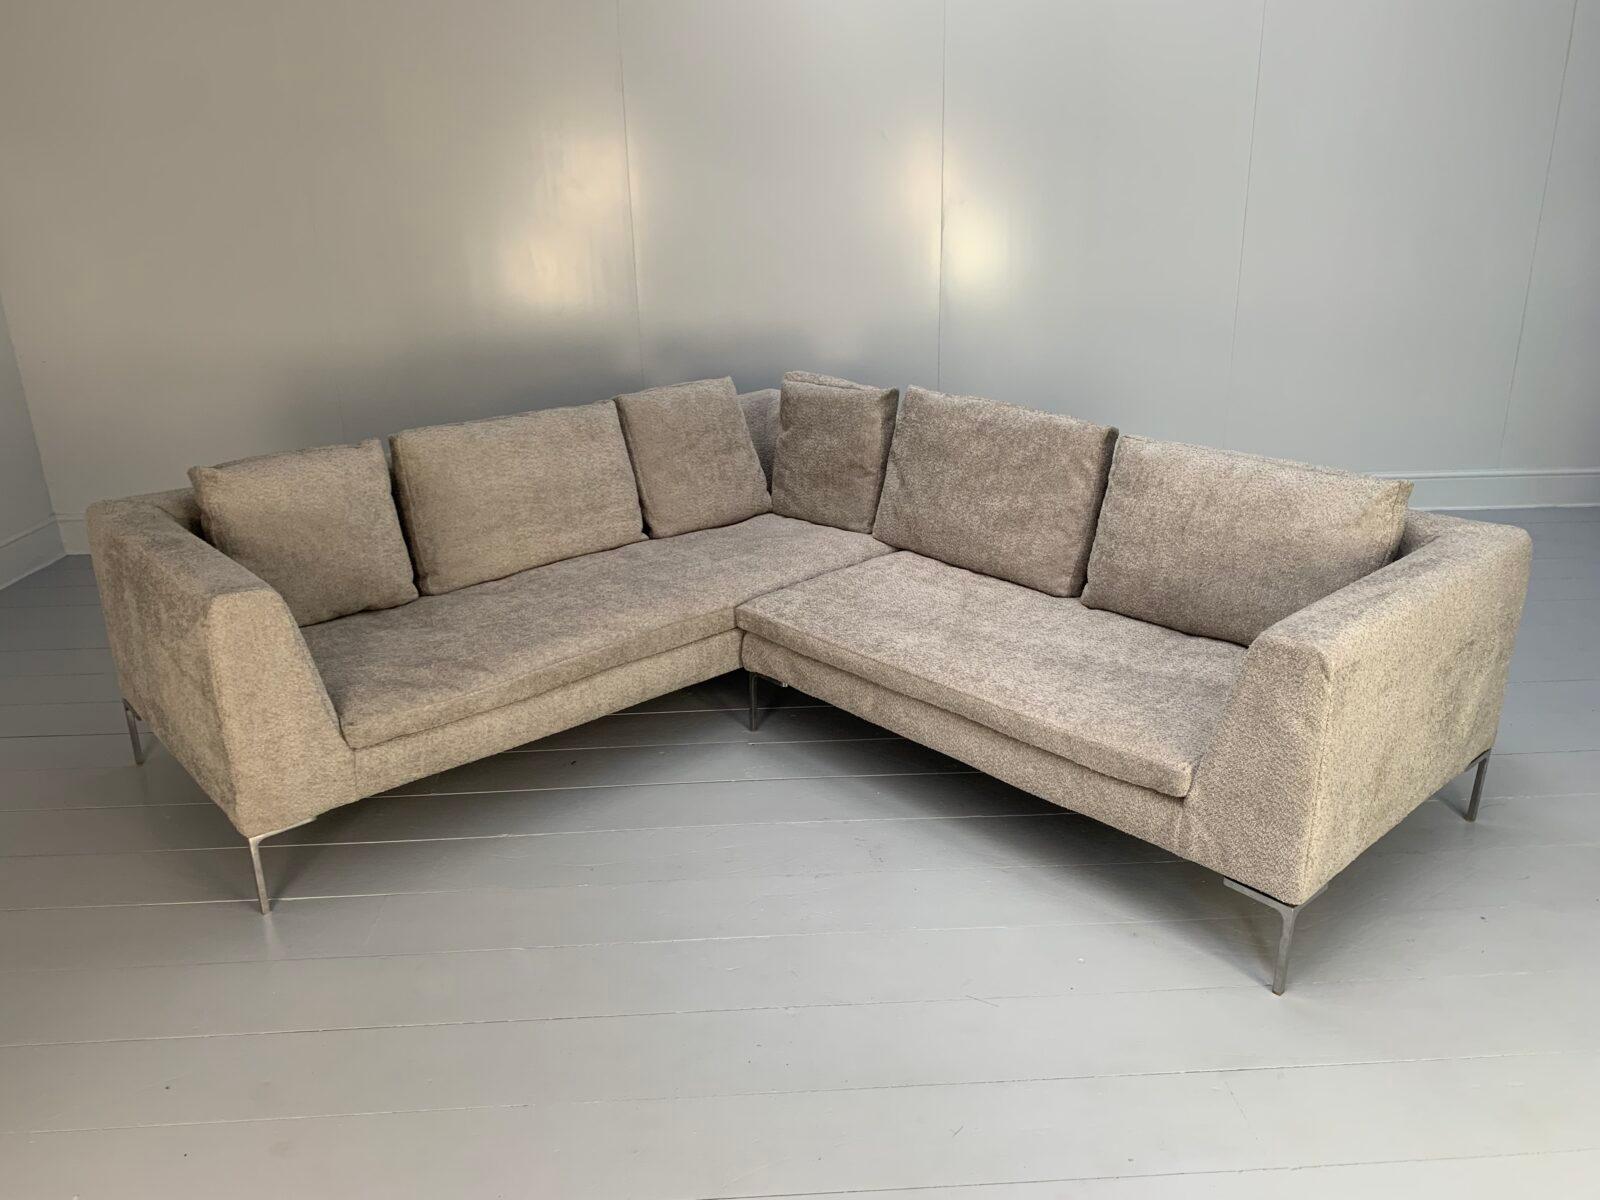 B&B Italia “Charles” L-Shape Sofa – In Pale Grey Boucle In Good Condition For Sale In Barrowford, GB